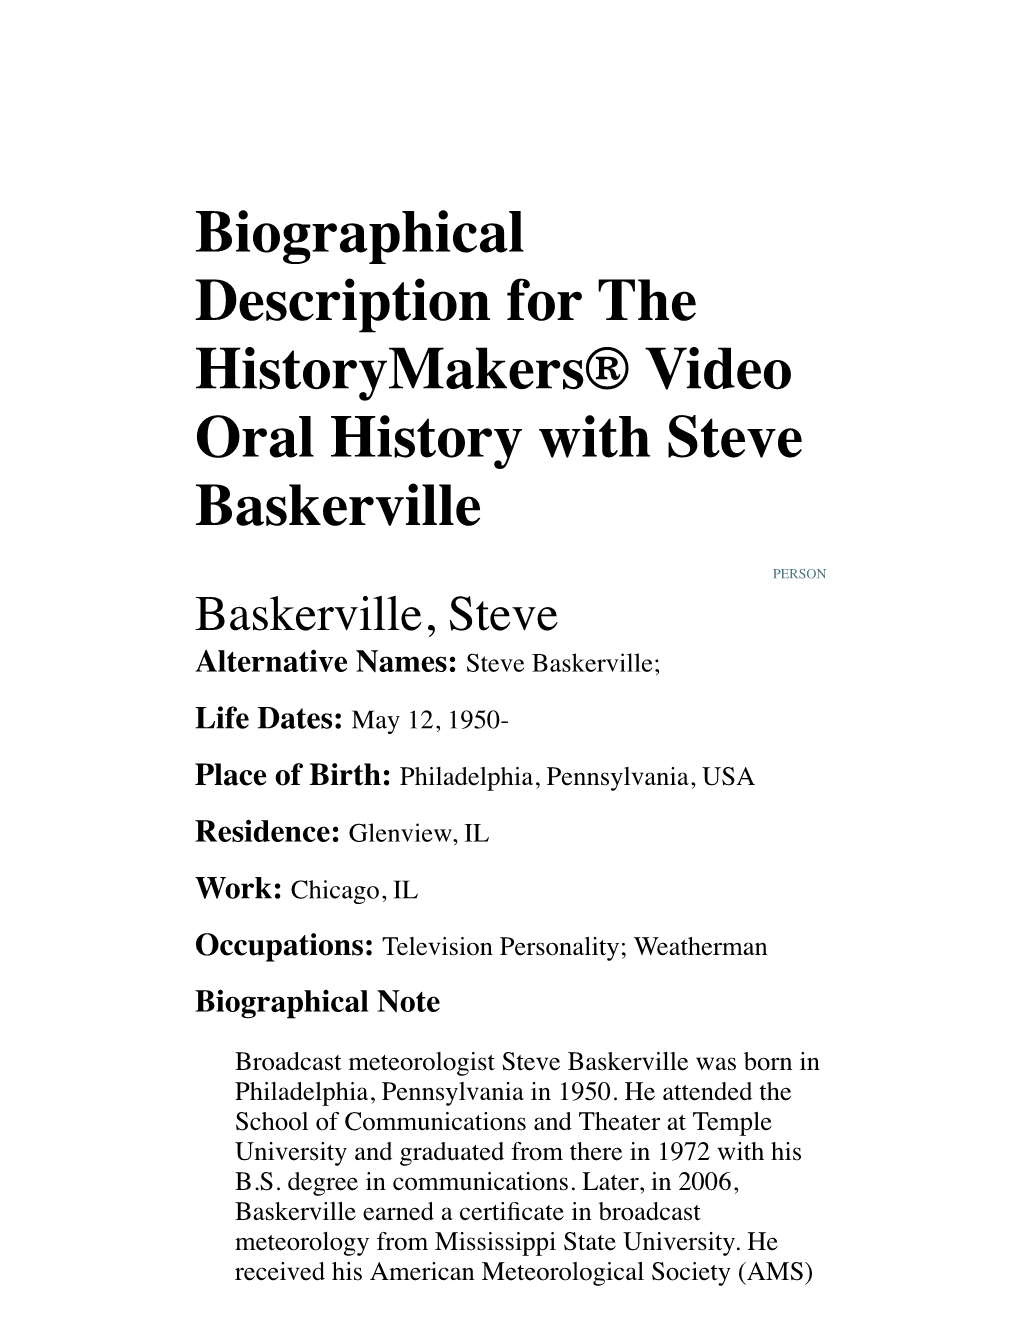 Biographical Description for the Historymakers® Video Oral History with Steve Baskerville